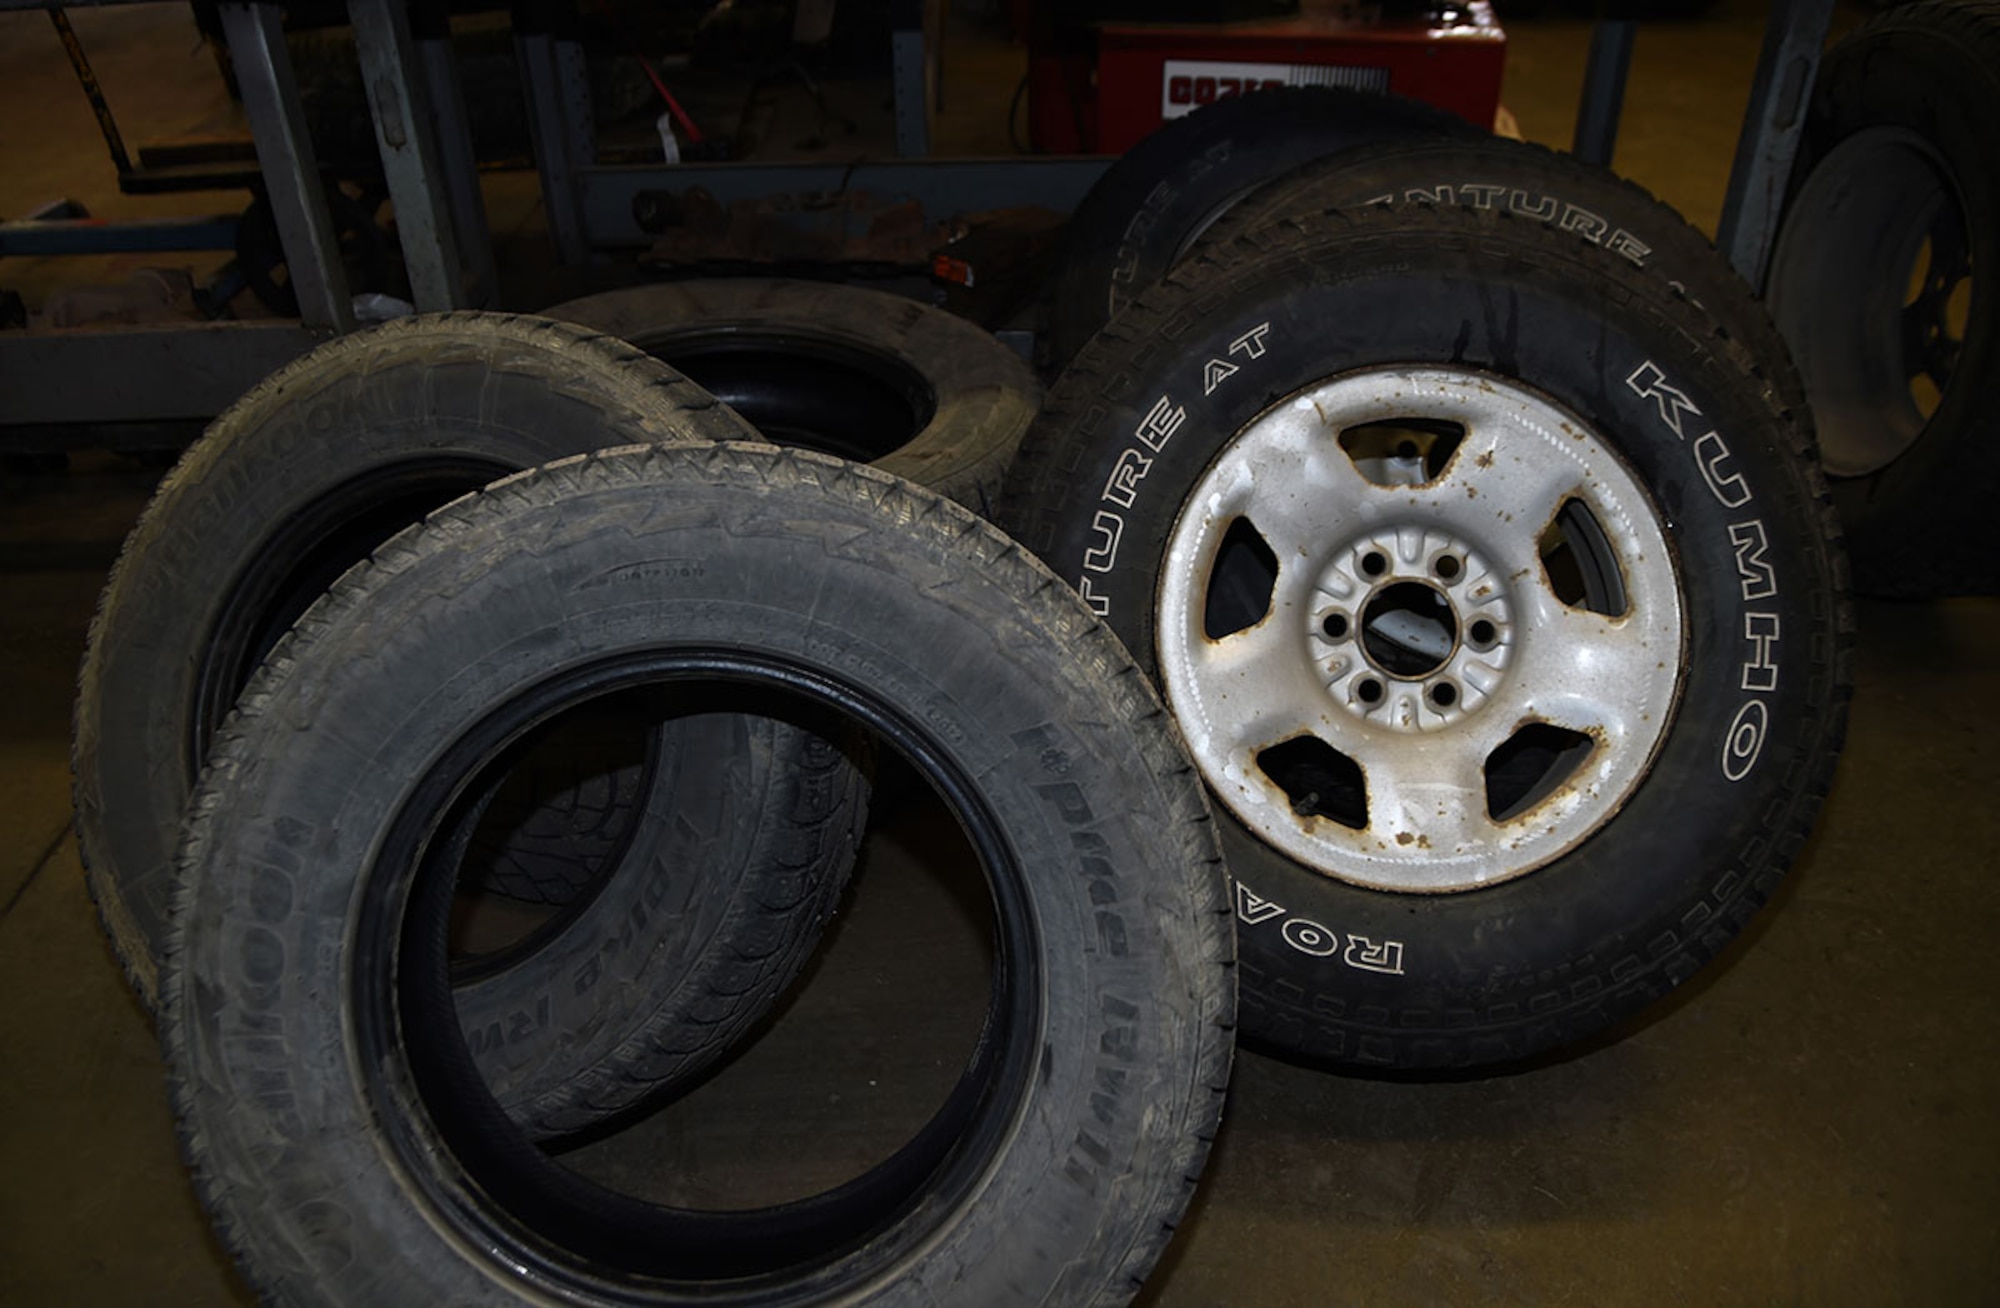 A set of winter tires are dismounted while a set of summer tires are mounted on rims at the Auto Skills Center, Joint Base Elmendorf-Richardson, Alaska, April 14, 2016. According to the Division of Motor Vehicles, it is unlawful to operate a motor vehicle with studded tires on a paved highway or road from May 1 through September 15. (U.S. Air Force photo by Staff Sgt. Sheila deVera)